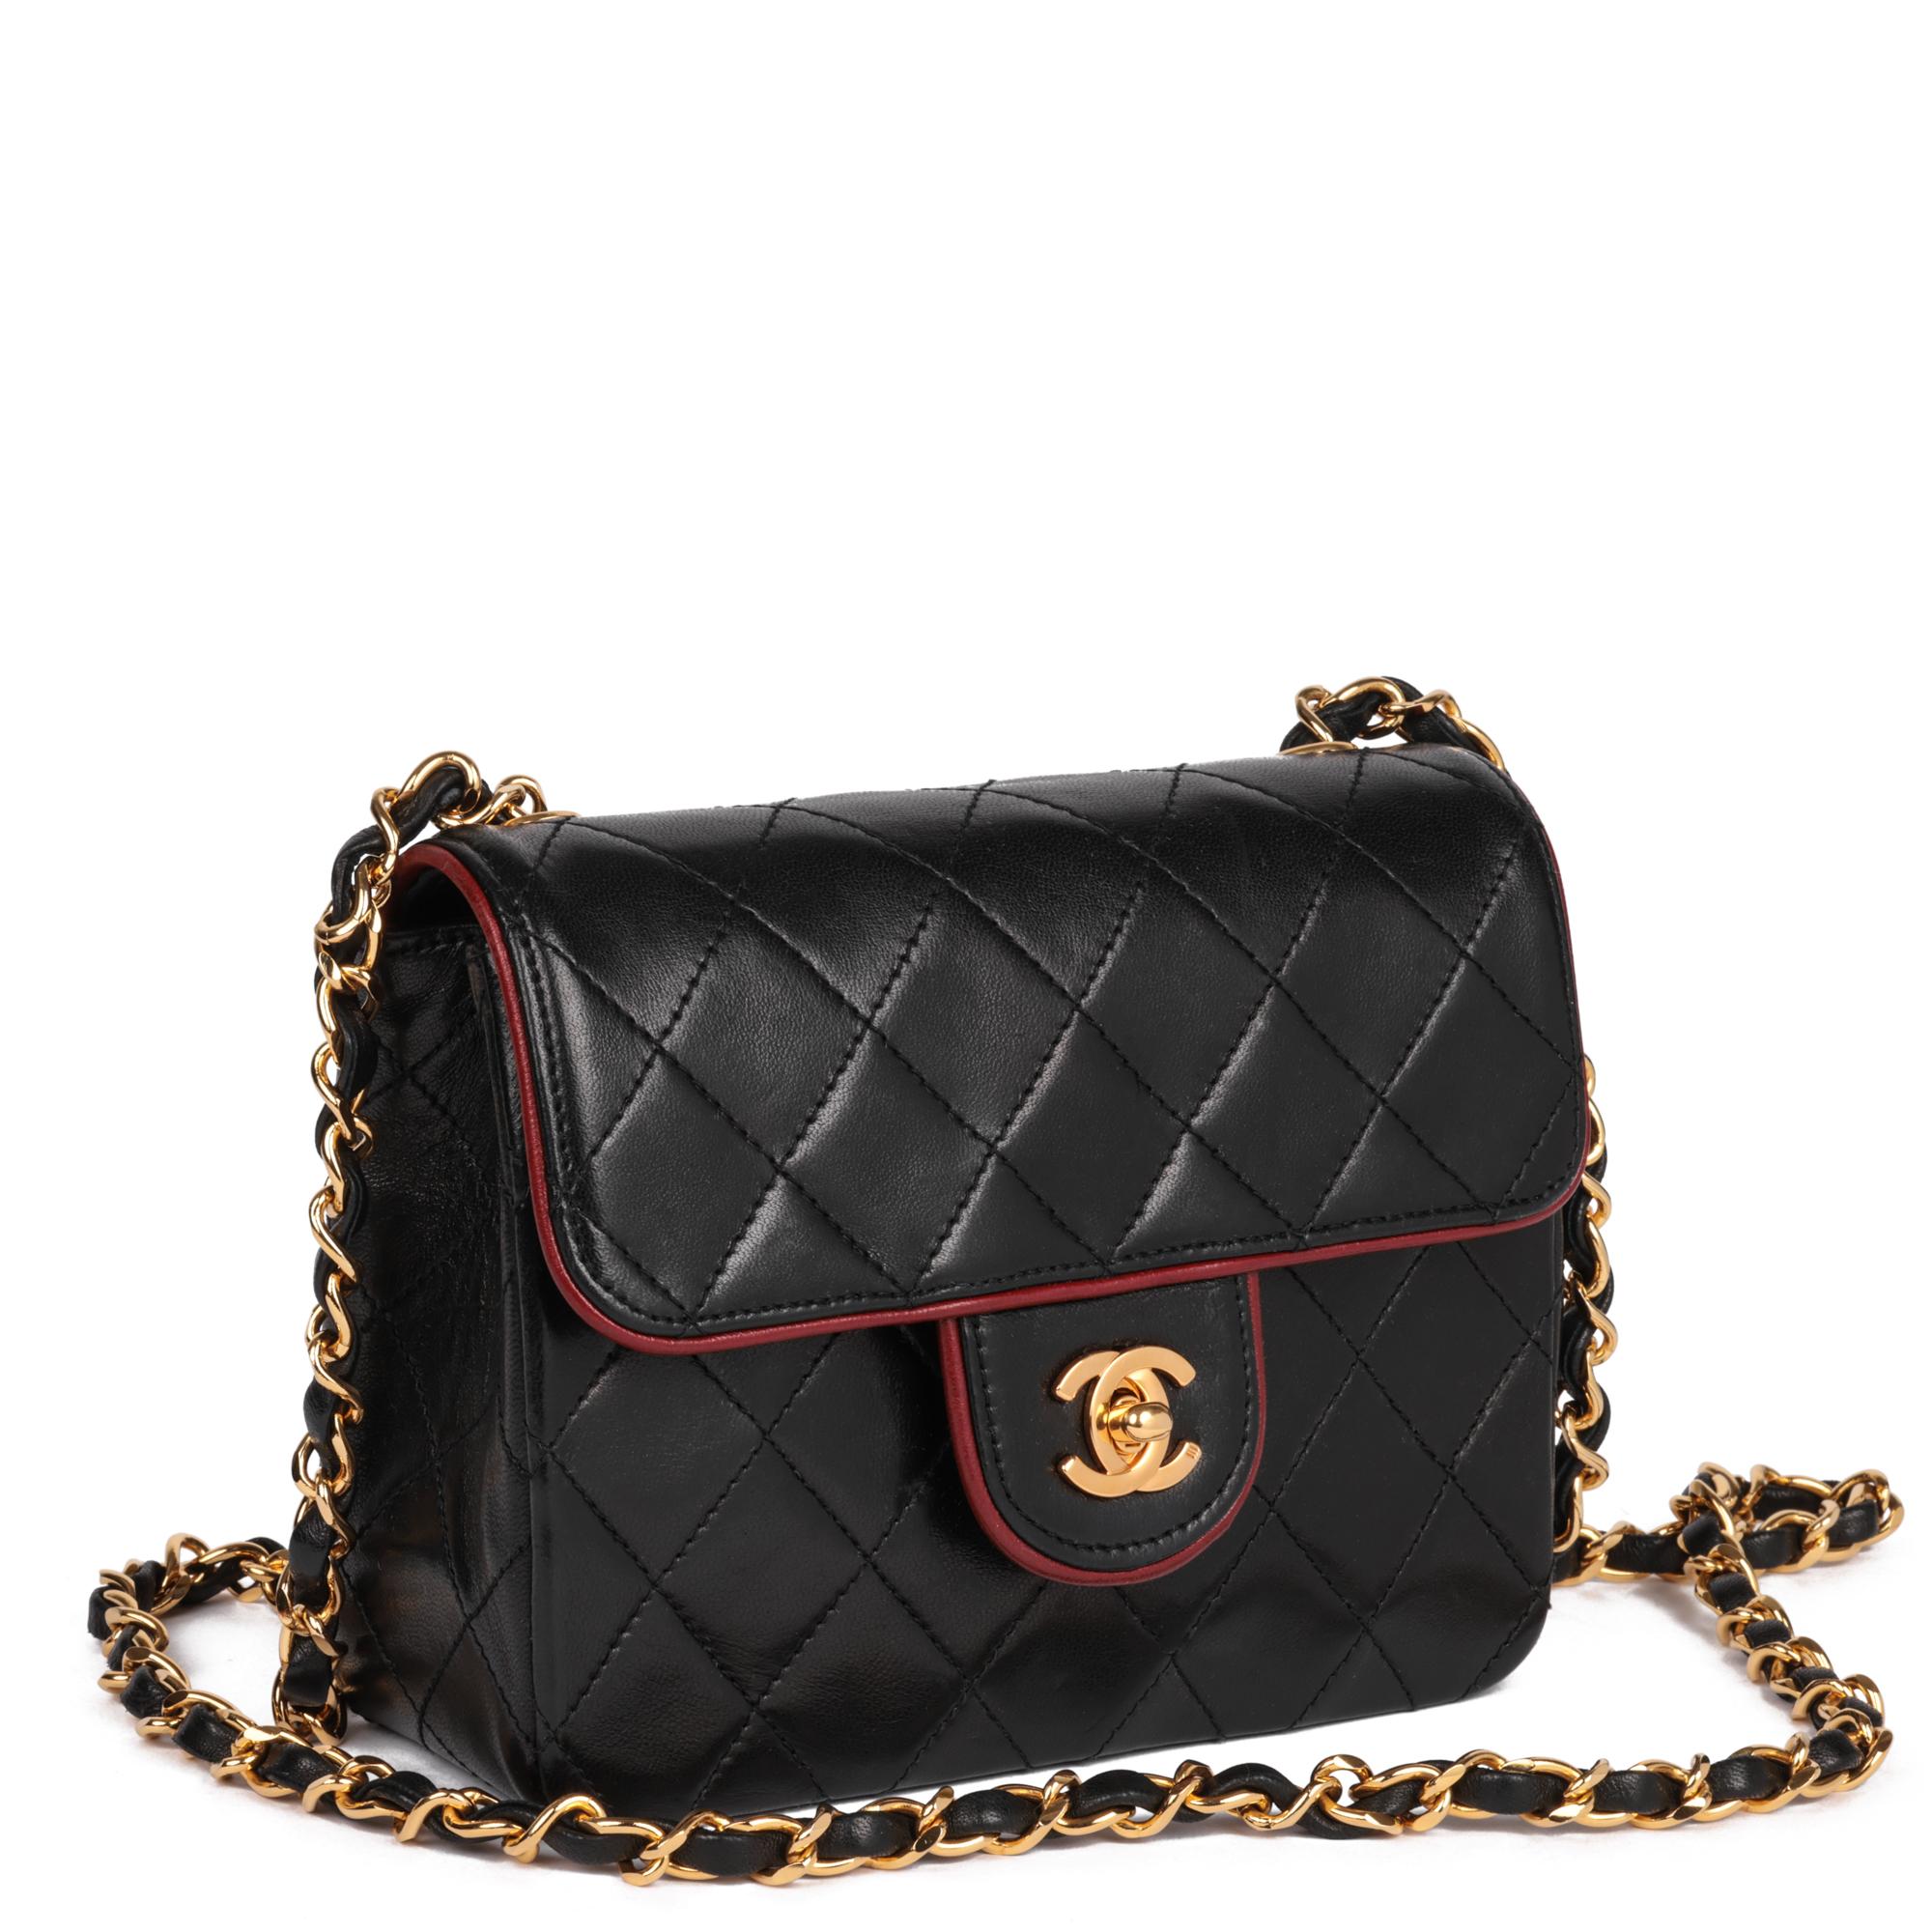 CHANEL
Black Quilted Lambskin & Red Trim Vintage Square Mini Flap Bag

Xupes Reference: HB5195
Serial Number: 1185021
Age (Circa): 1990
Accompanied By: Chanel Dust Bag, Authenticity Card
Authenticity Details: Authenticity Card, Serial Sticker (Made